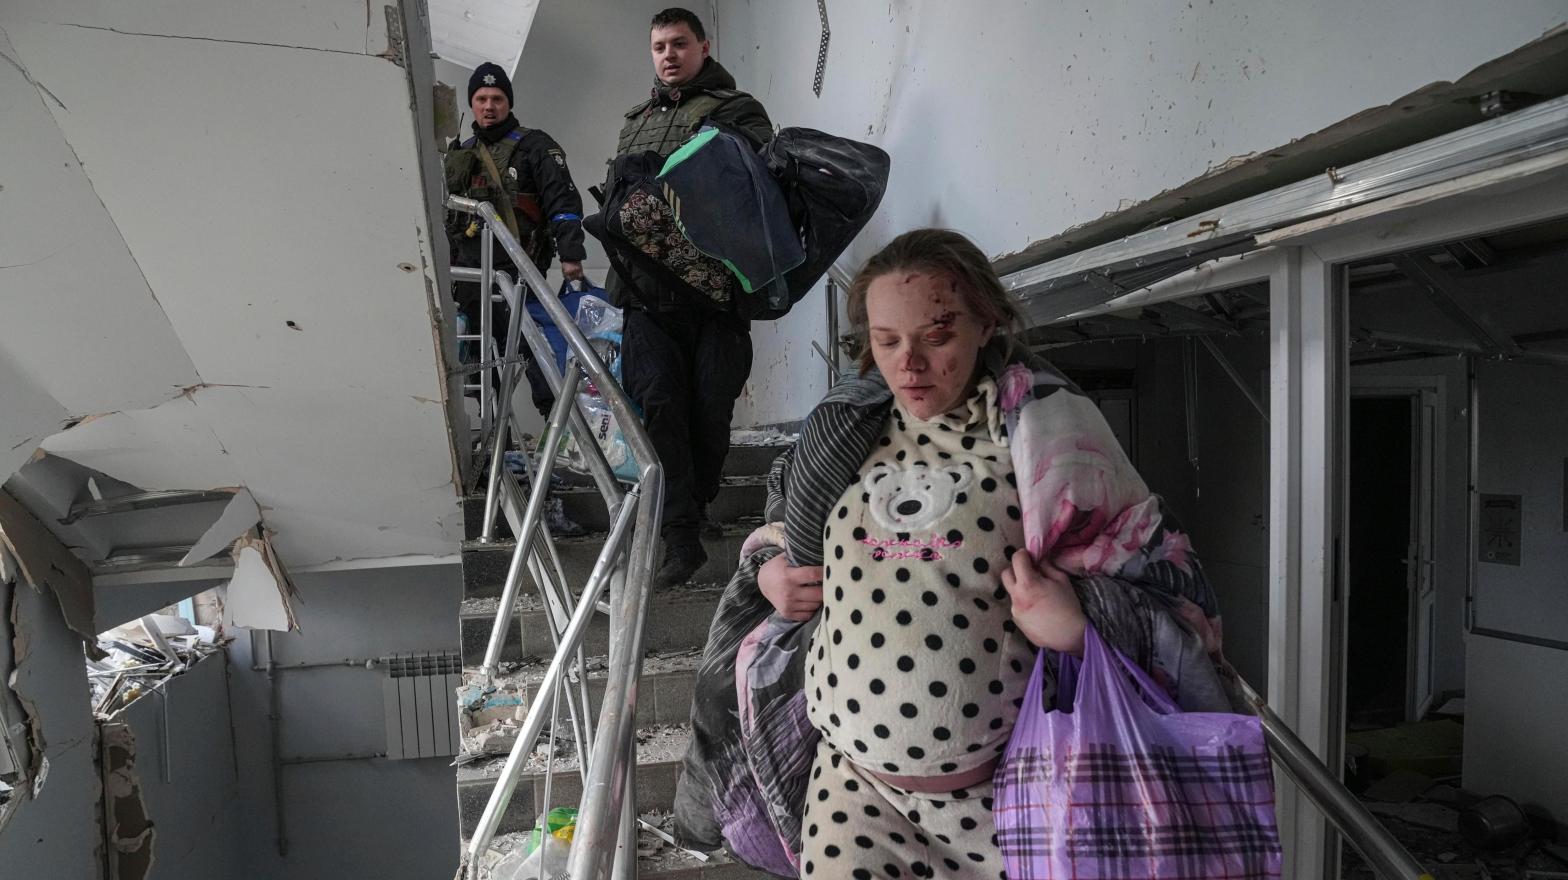 An injured pregnant woman walks downstairs in a maternity hospital  damaged by shelling in Mariupol, Ukraine, on March 9, 2022. (Photo: Evgeniy Maloletka, AP)